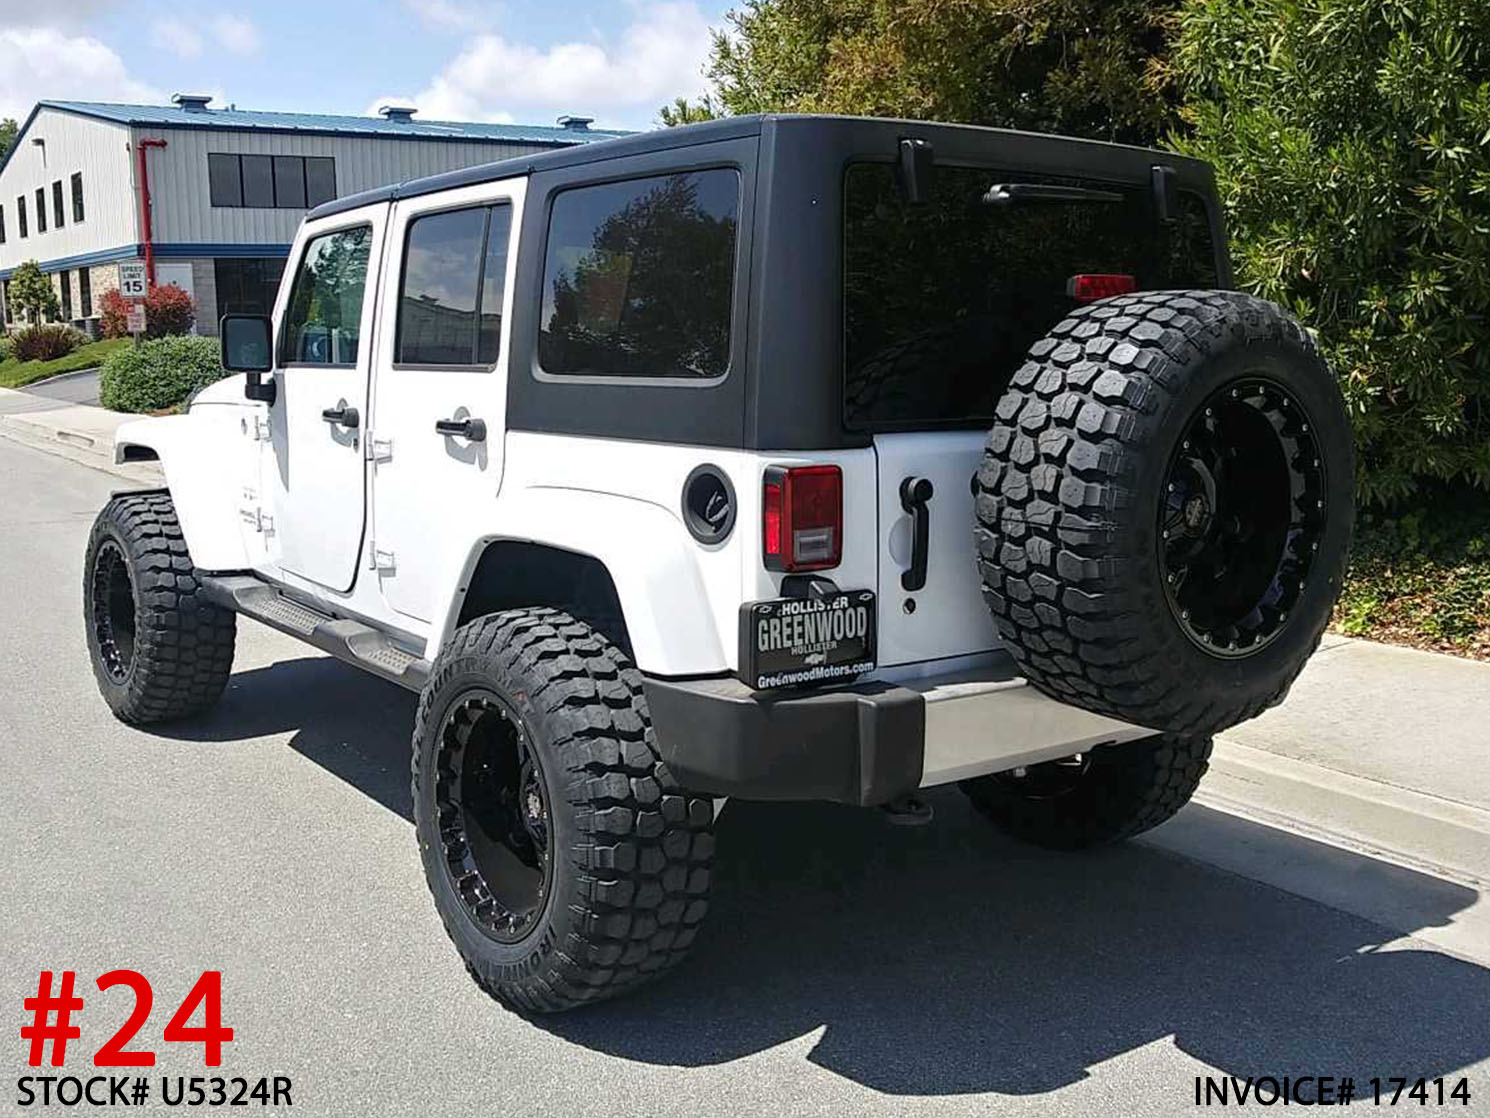 USED 2017 JEEP WRANGLER 4DR #U5324R | Truck and SUV Parts ...